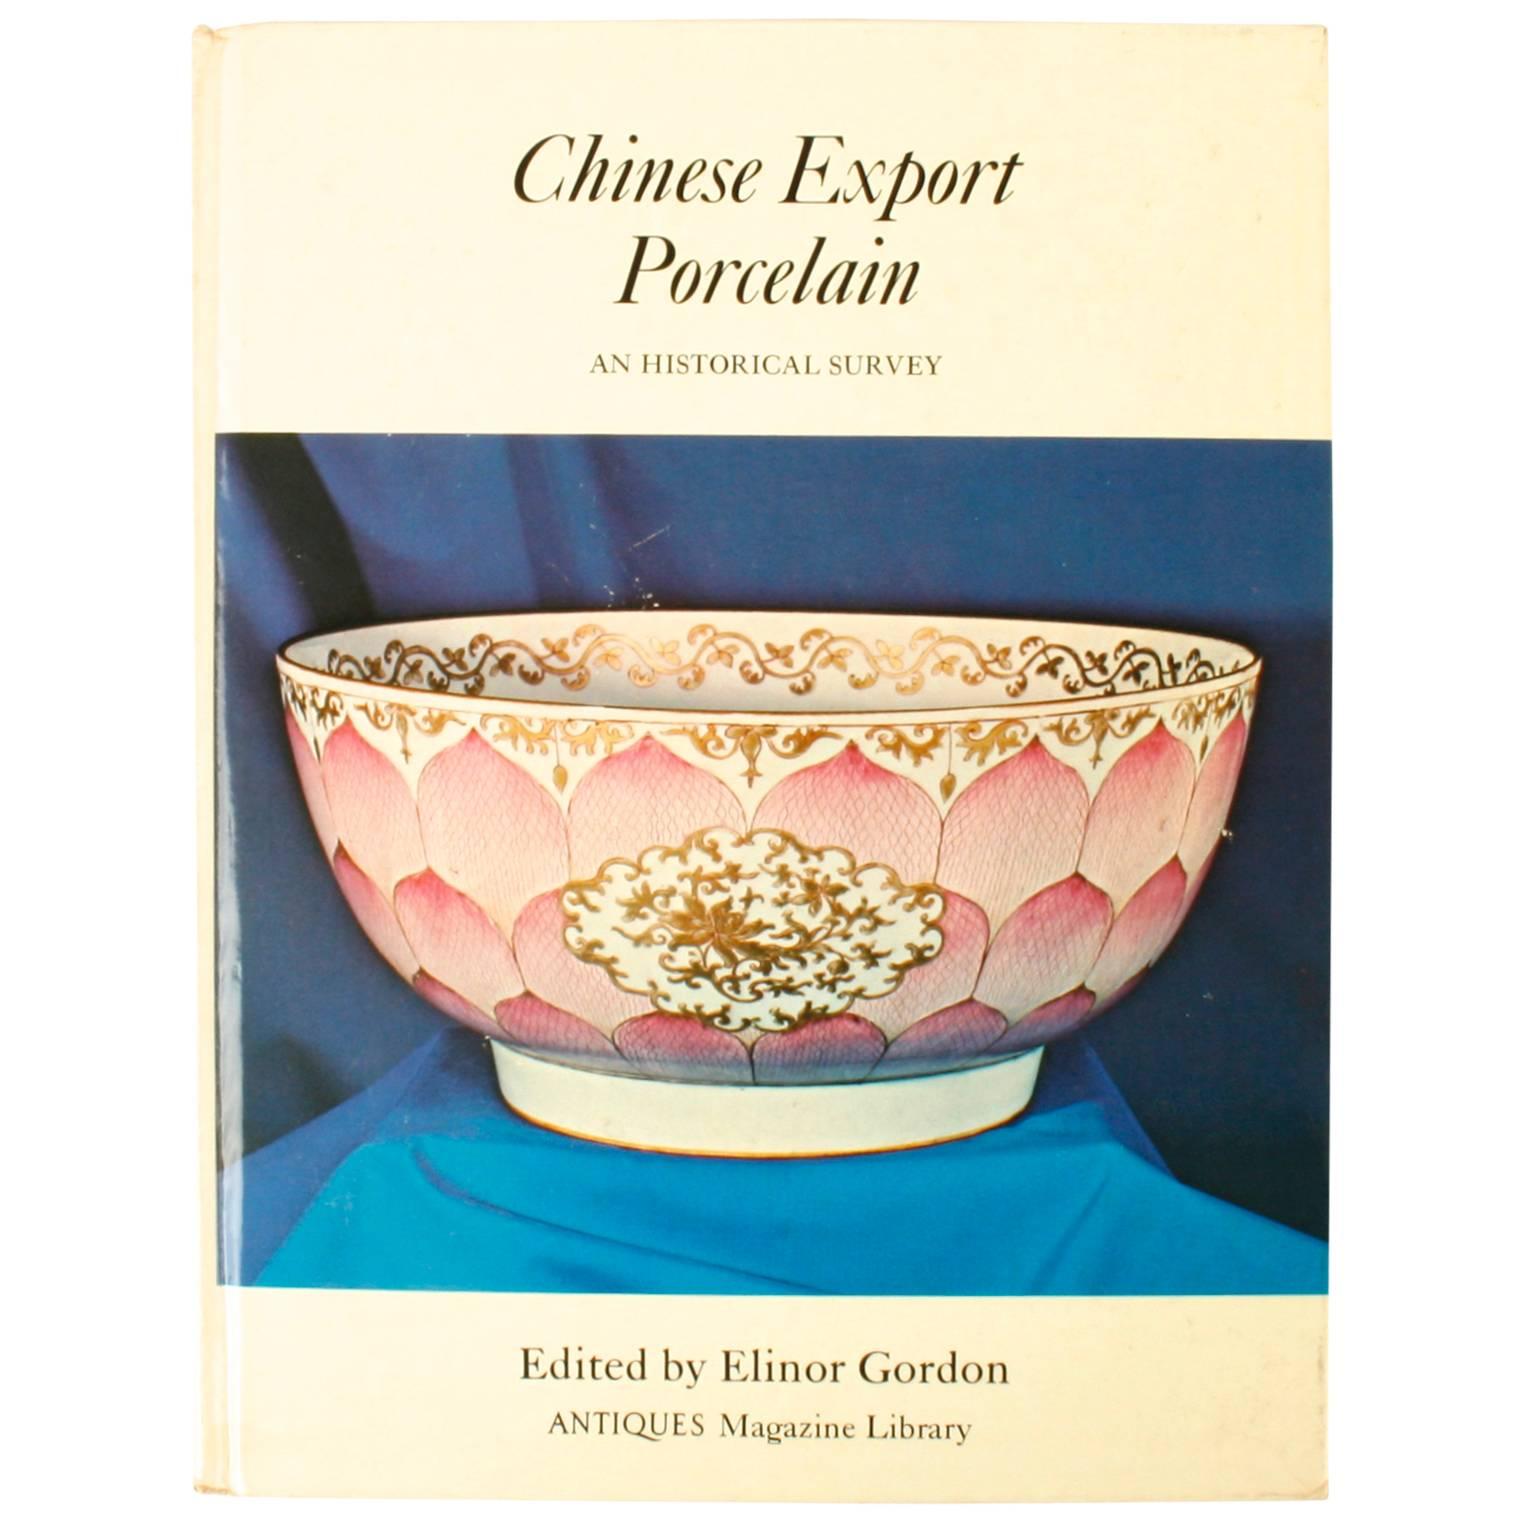 Chinese Export Porcelain: An Historical Survey by Elinor Gordon First Edition